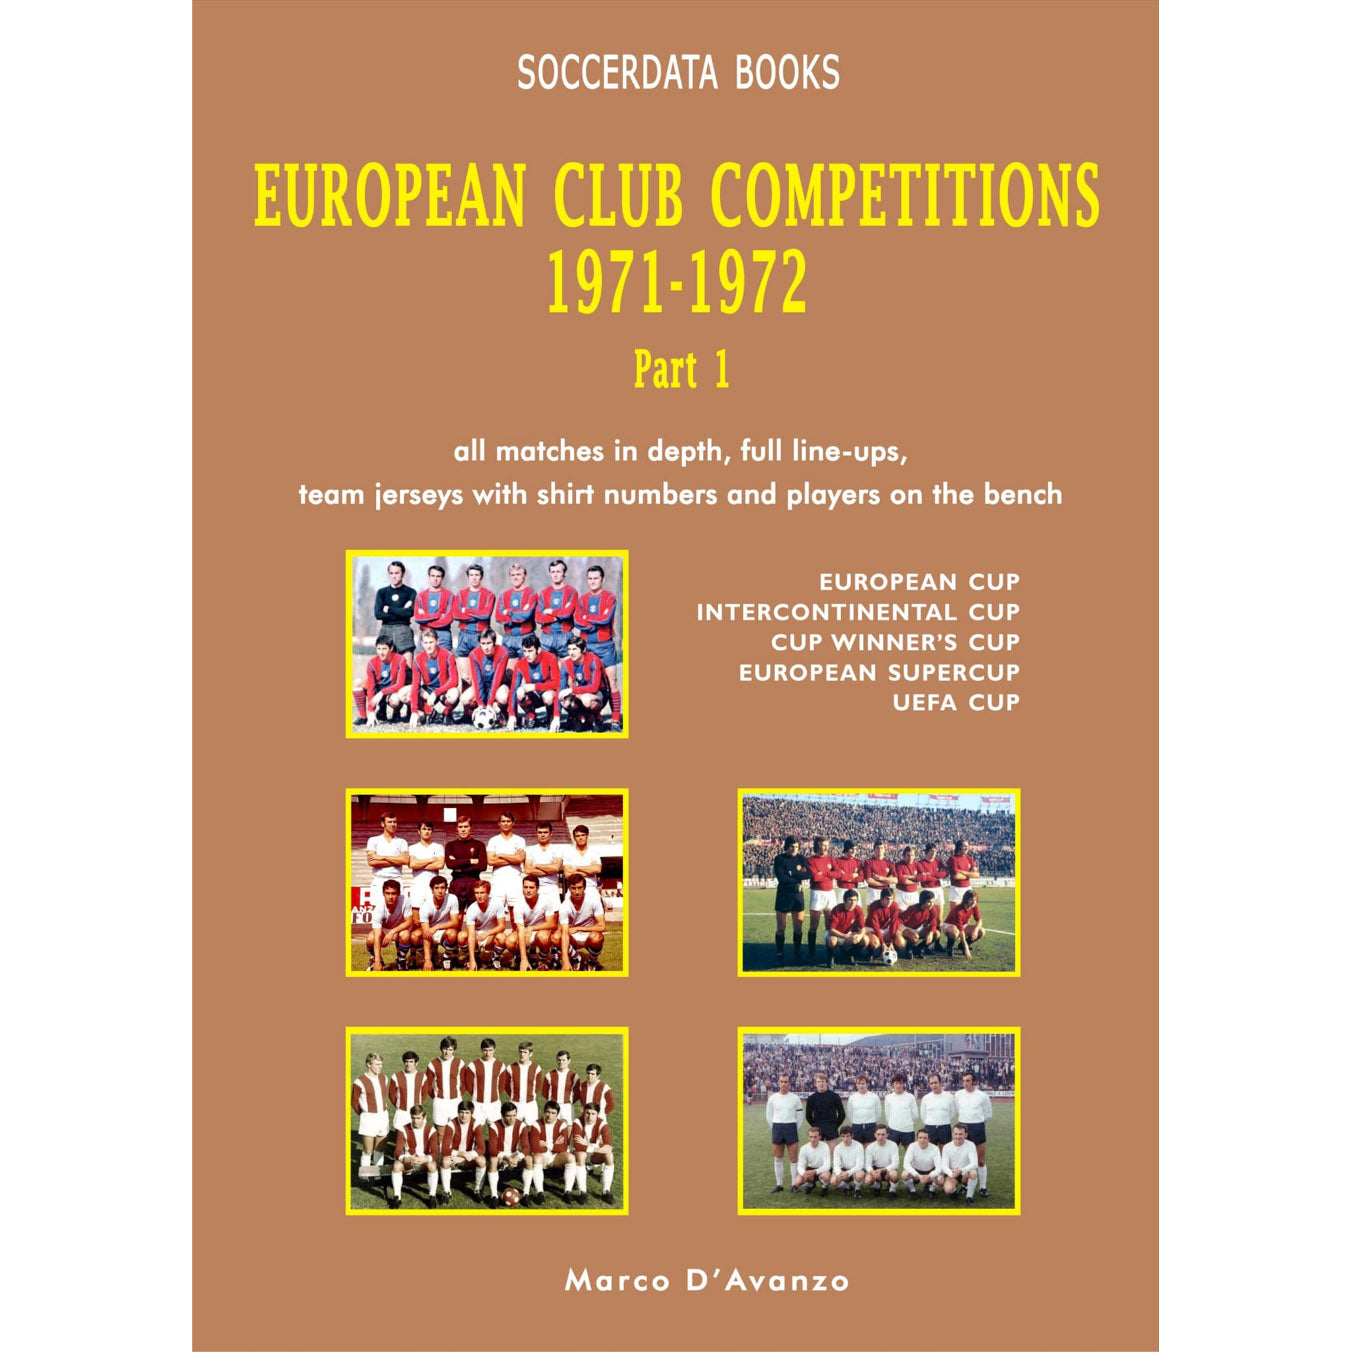 European Club Competitions 1971-1972 – Part 1